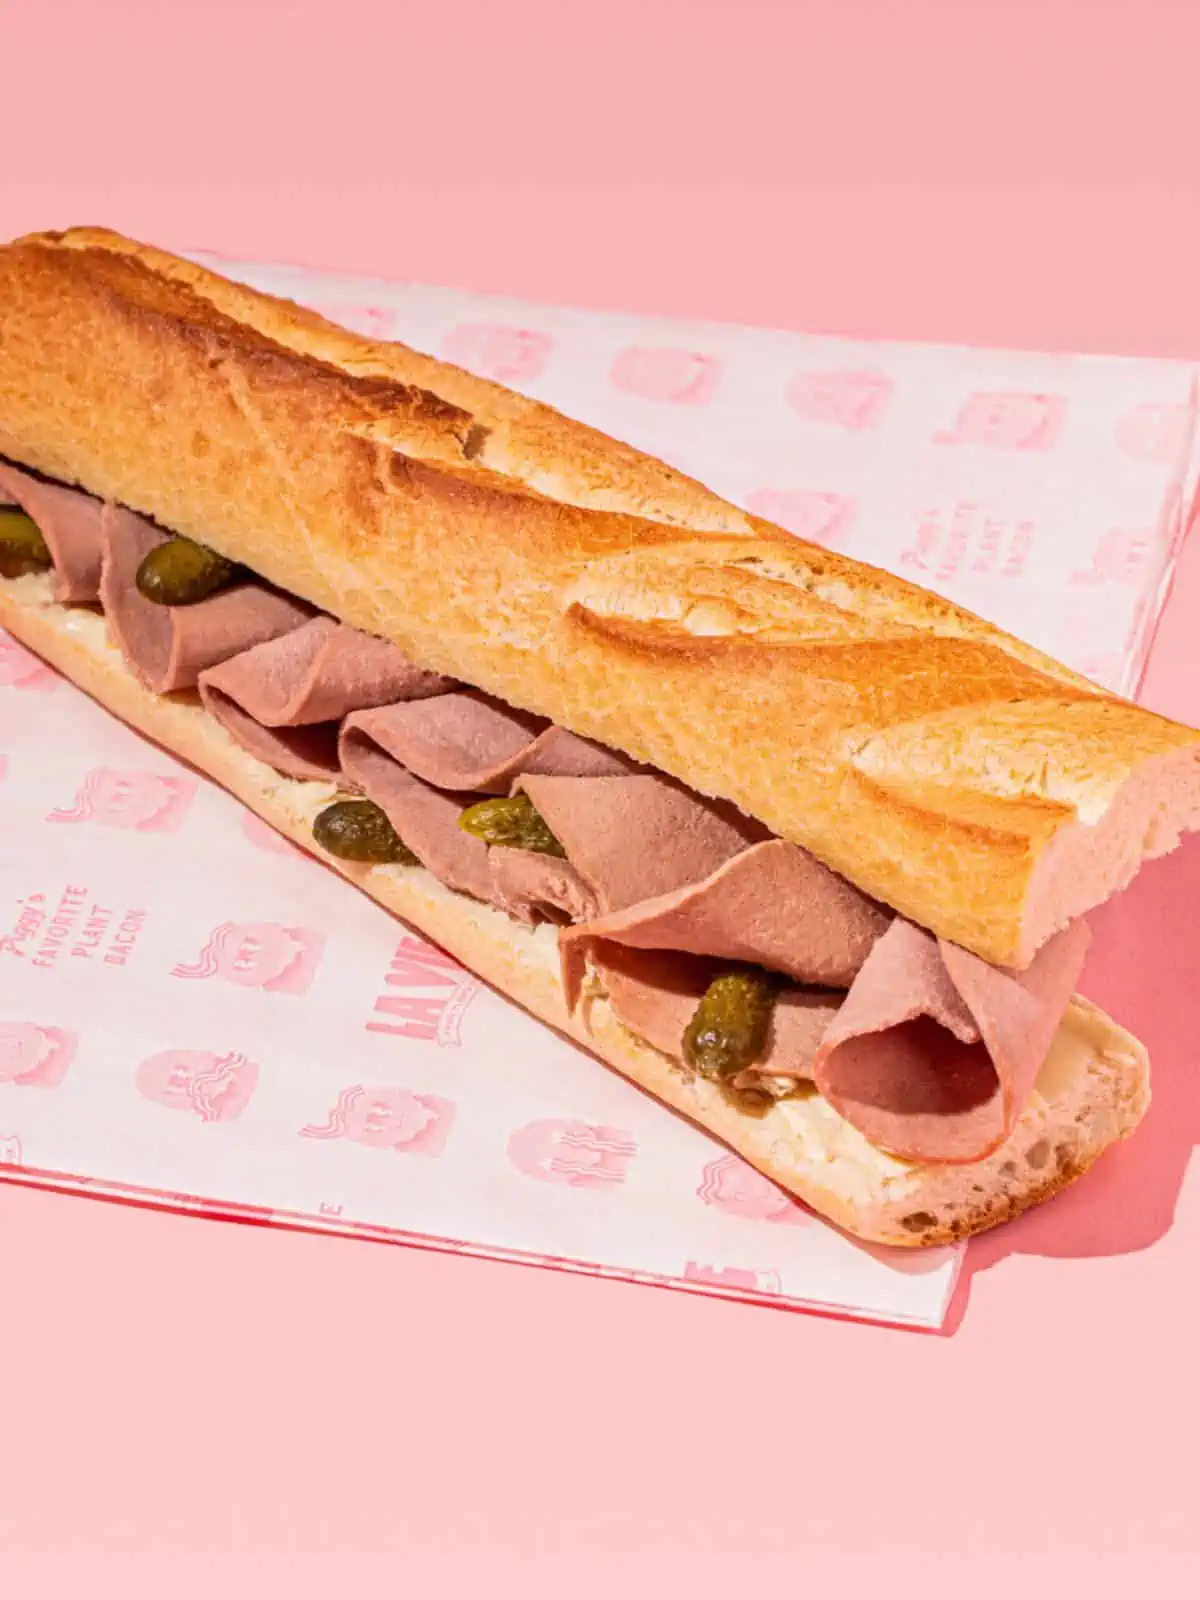 A sandwich with La Vie vegan ham slices folded inside of it on deli paper with a pink background.